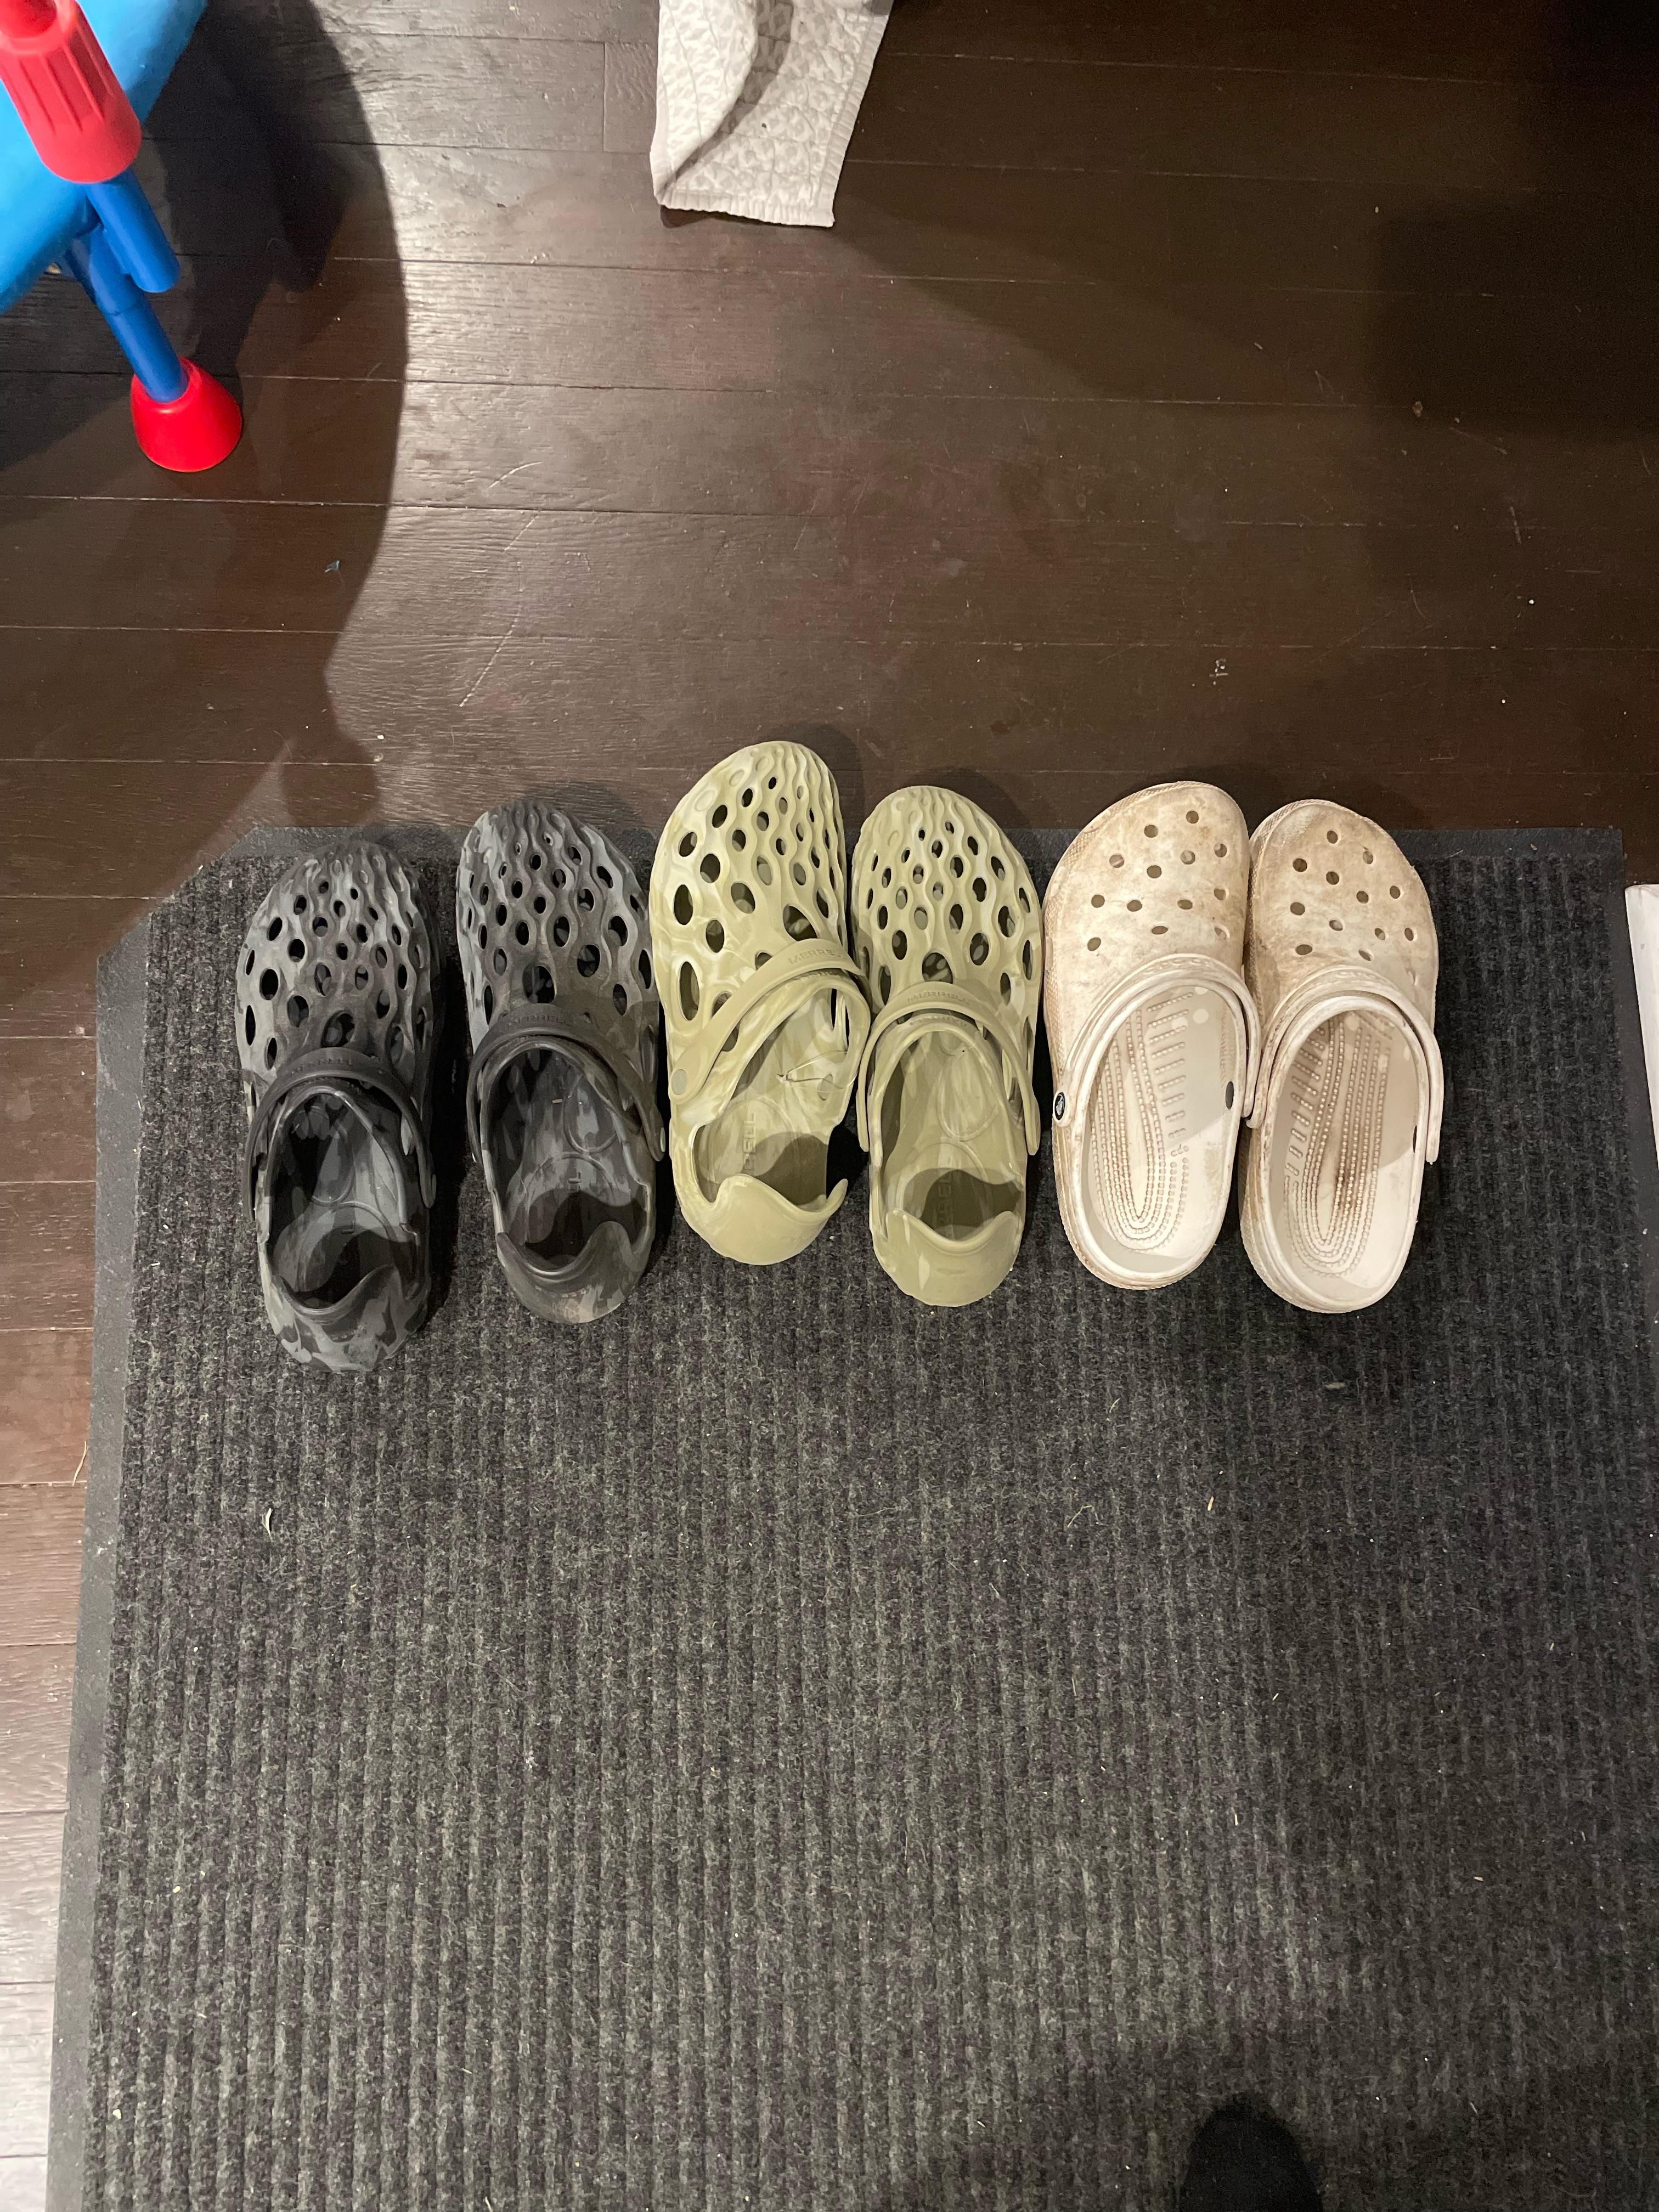 My husband says he never has had any desire to ever cheat. I mean it’s comforting to hear but his shoe rotation already told me that.